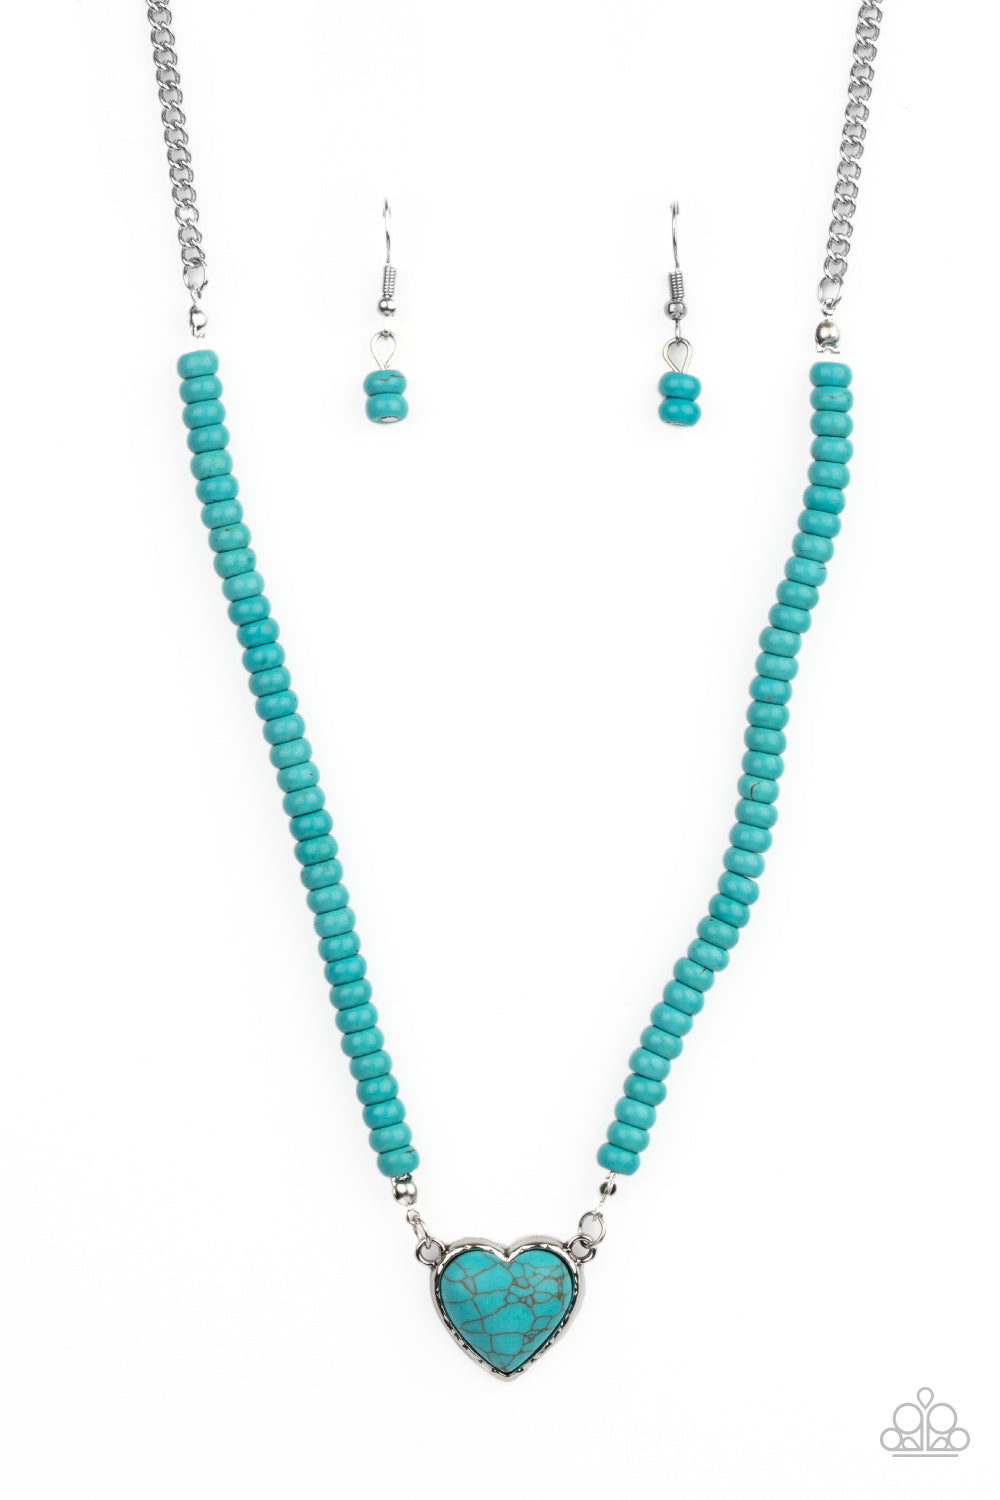 Country Sweetheart - Blue Turquoise Necklace - Paparazzi Accessories